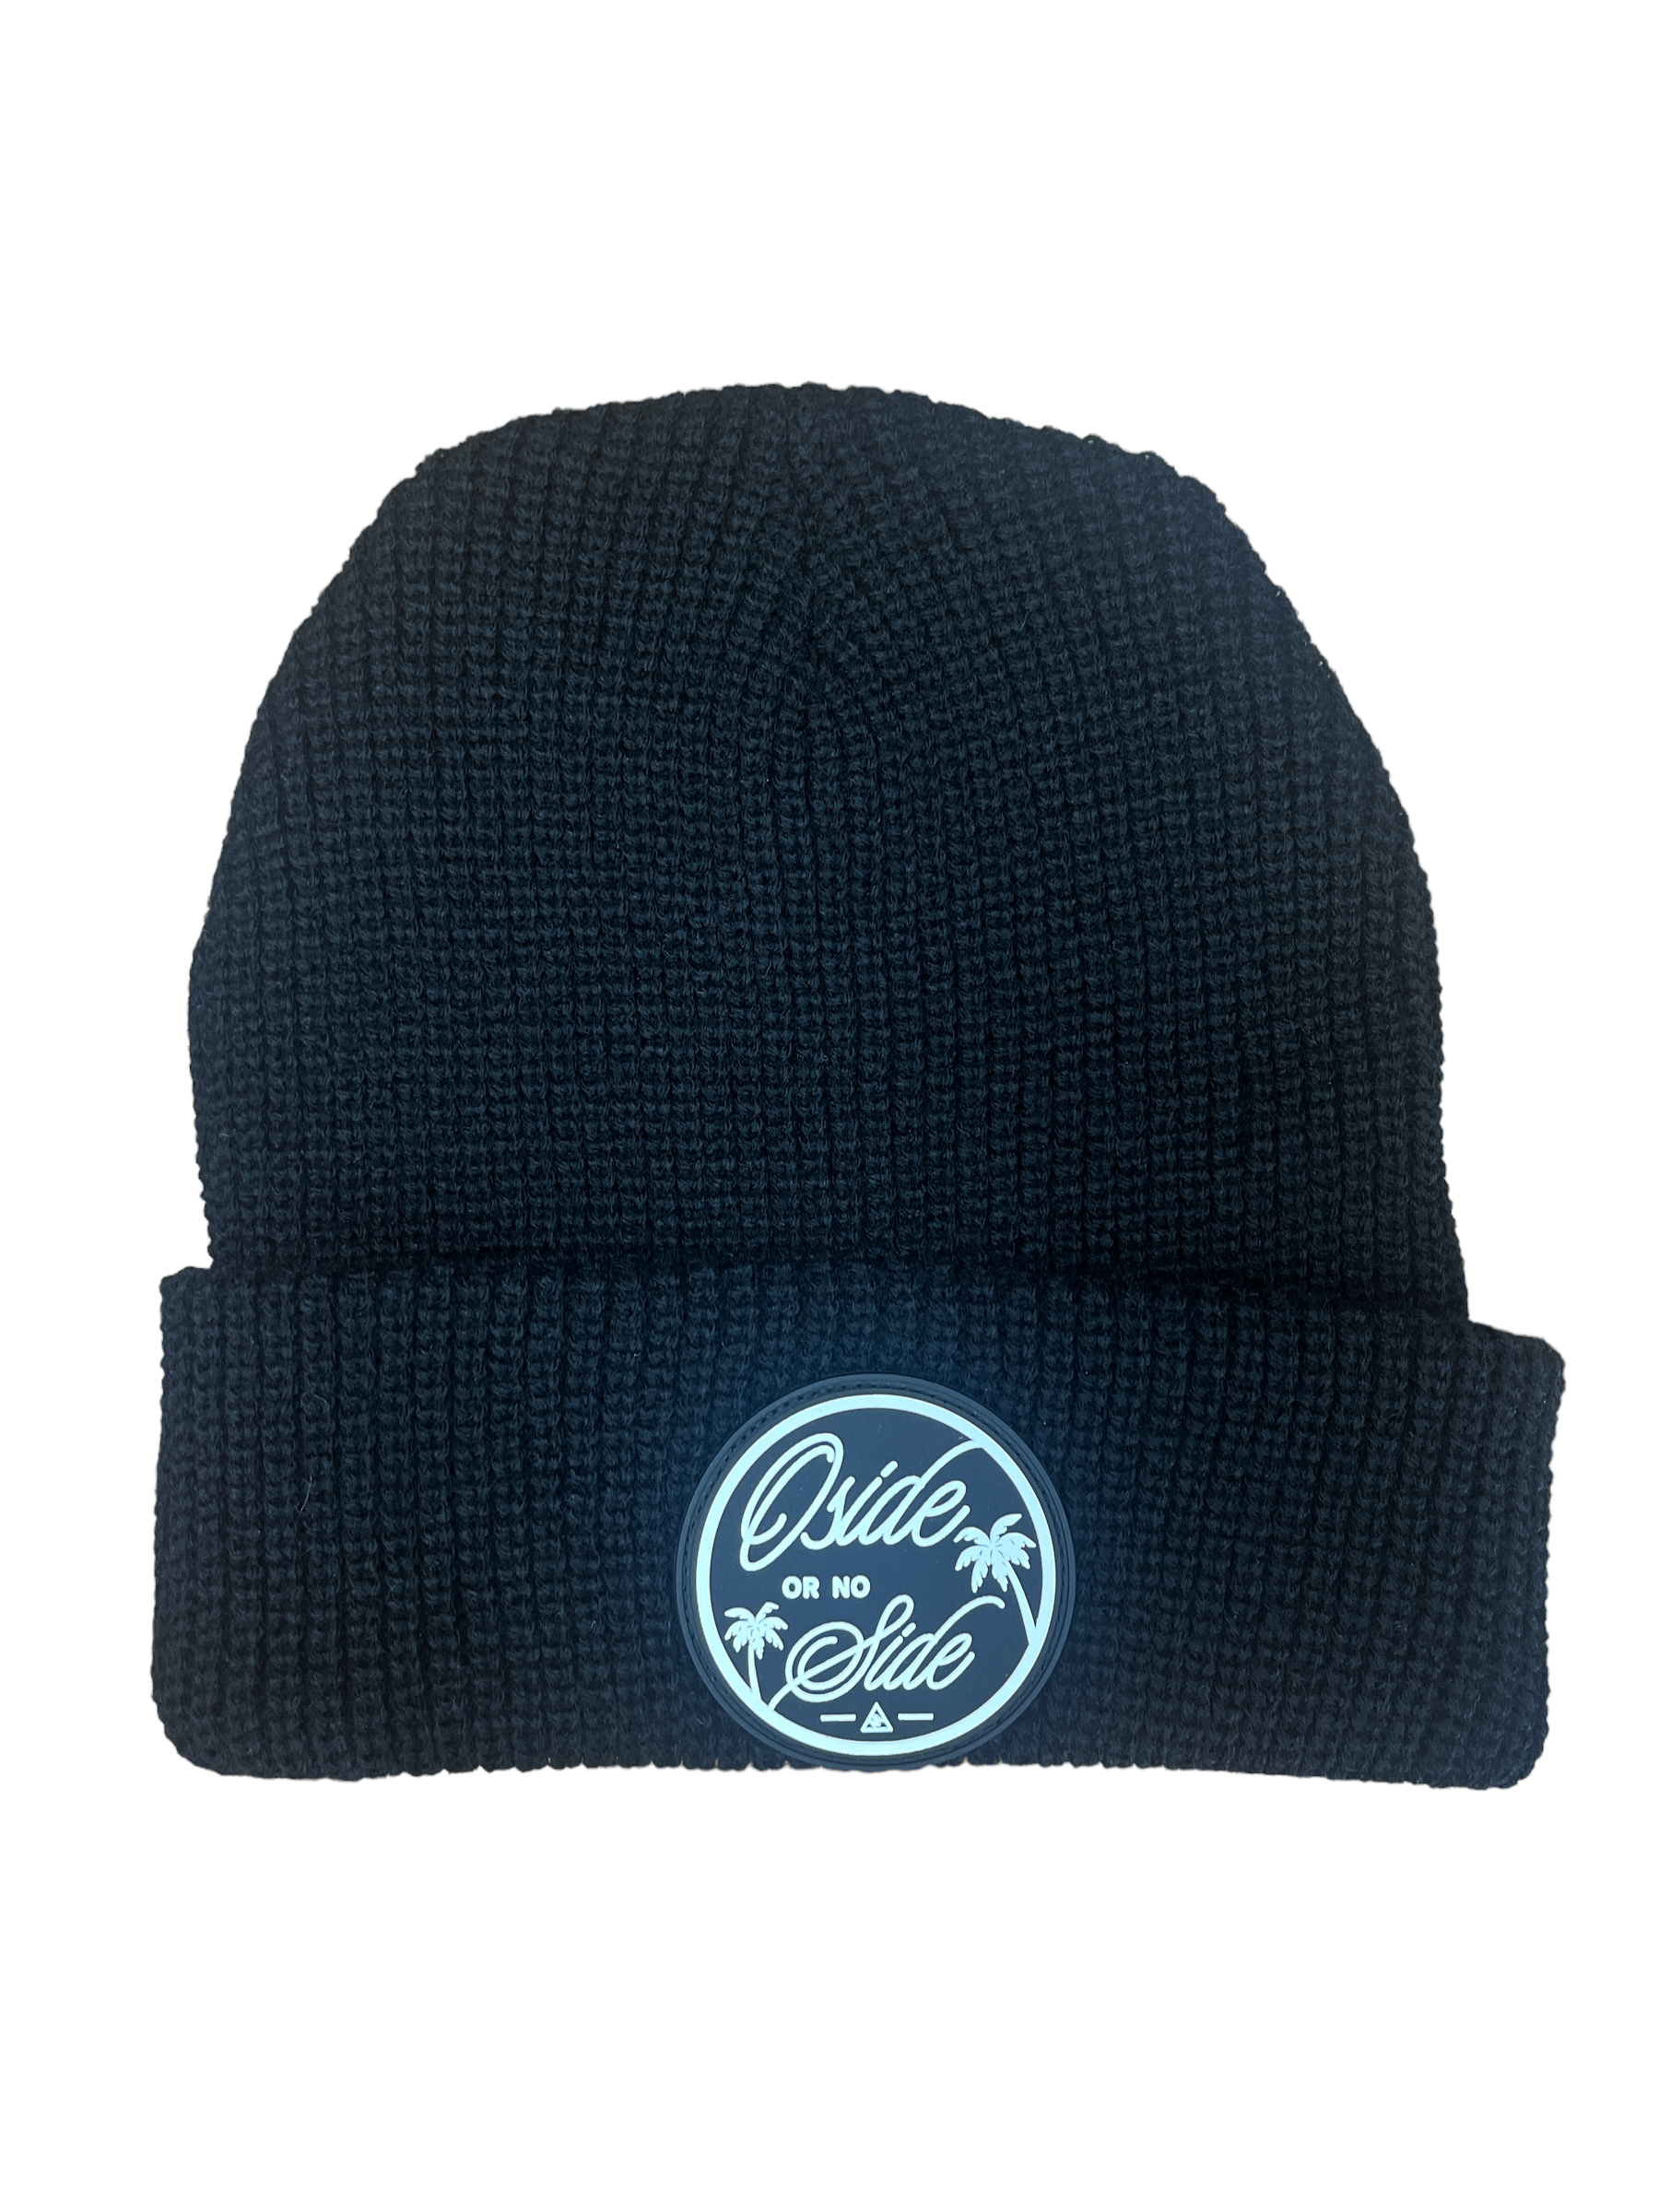 Oside Or No Side Patch Beanie (Black)